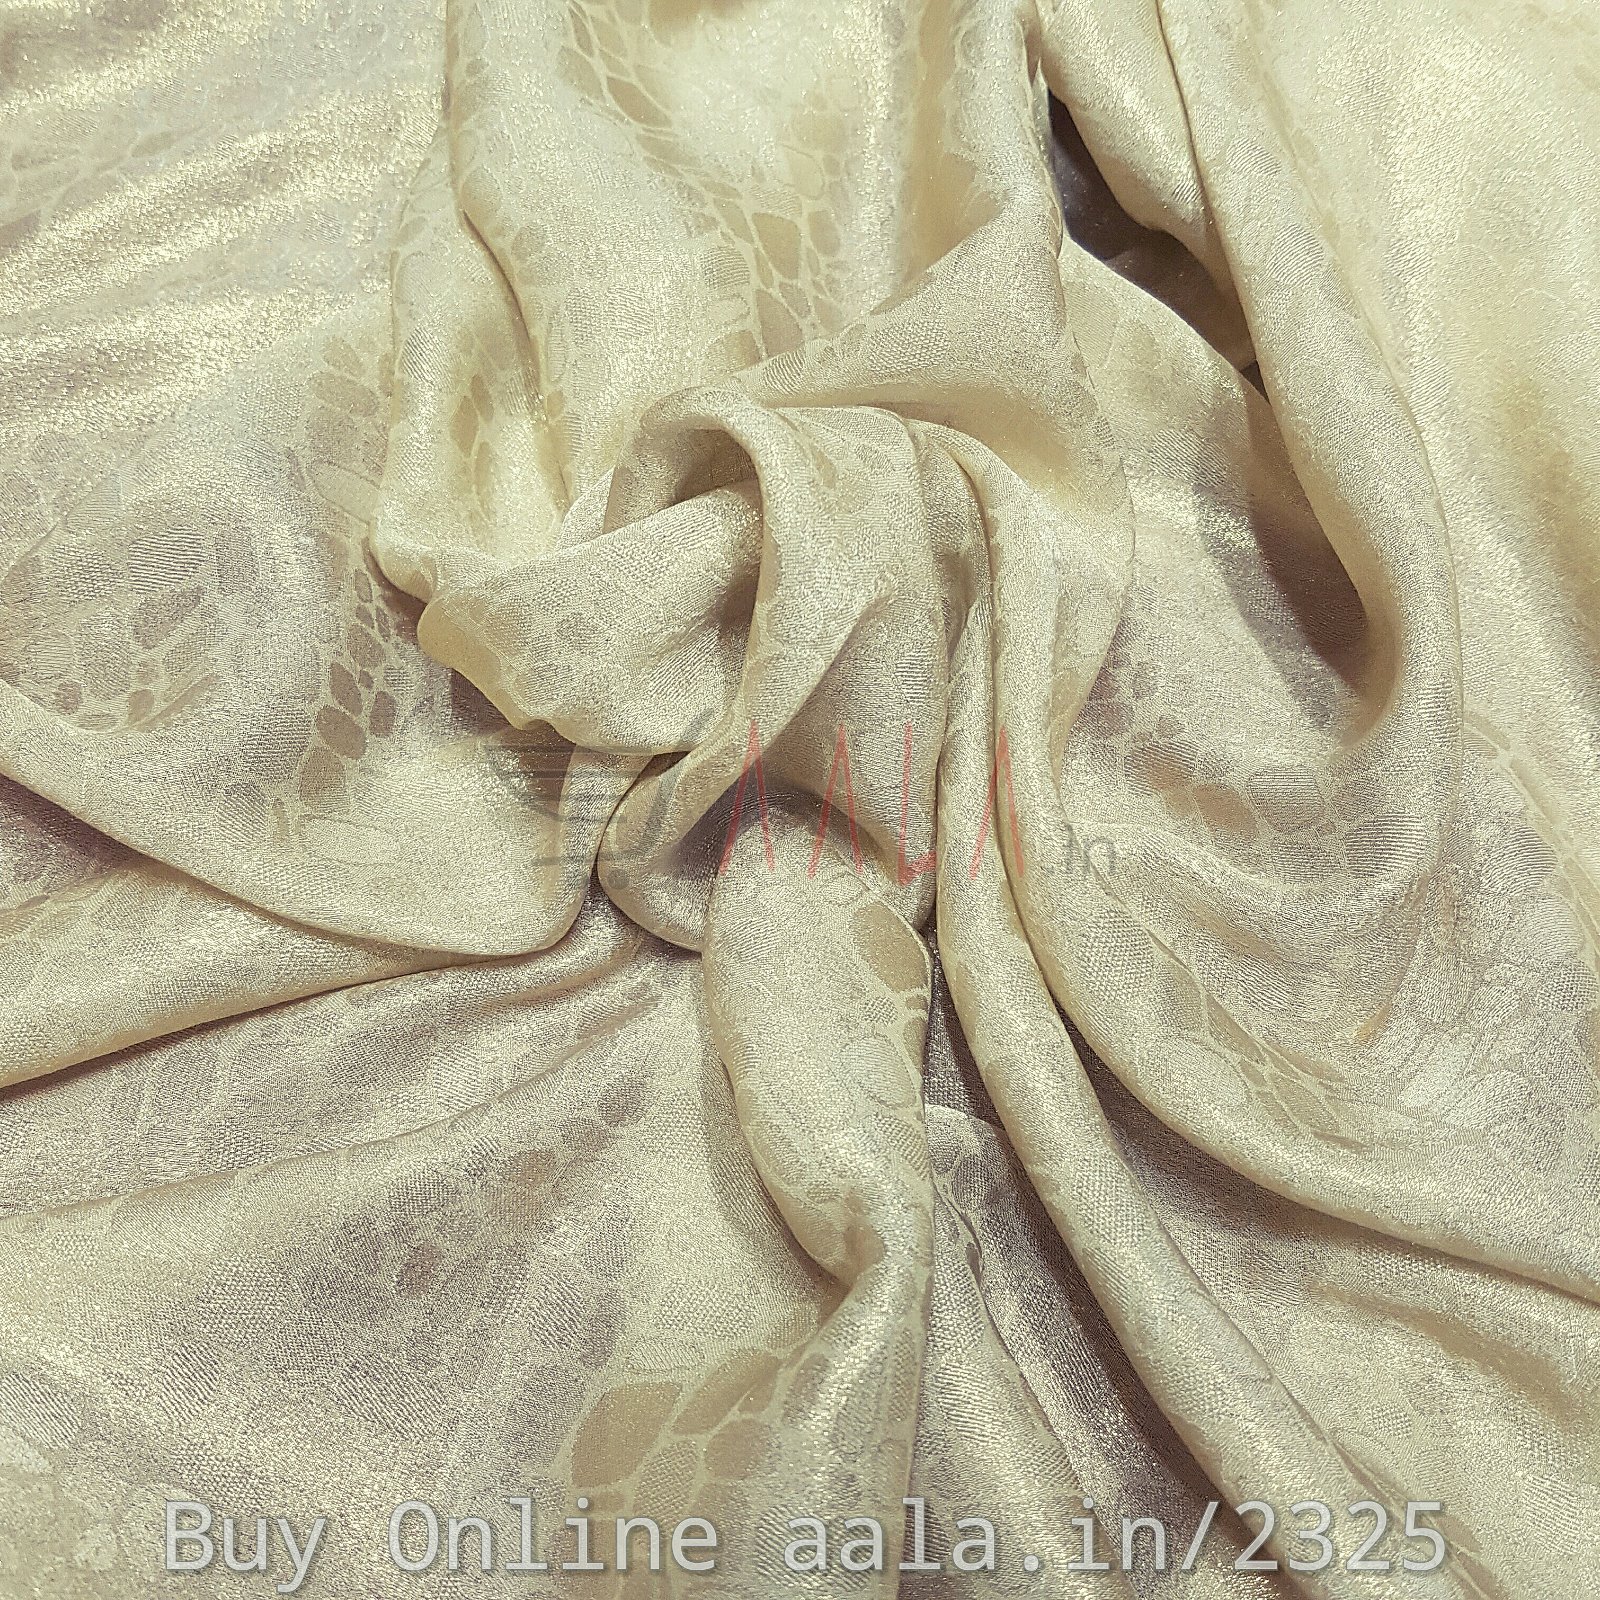 Foil Satin Georgette Poly-ester 44 Inches Dyed Per Metre #2325